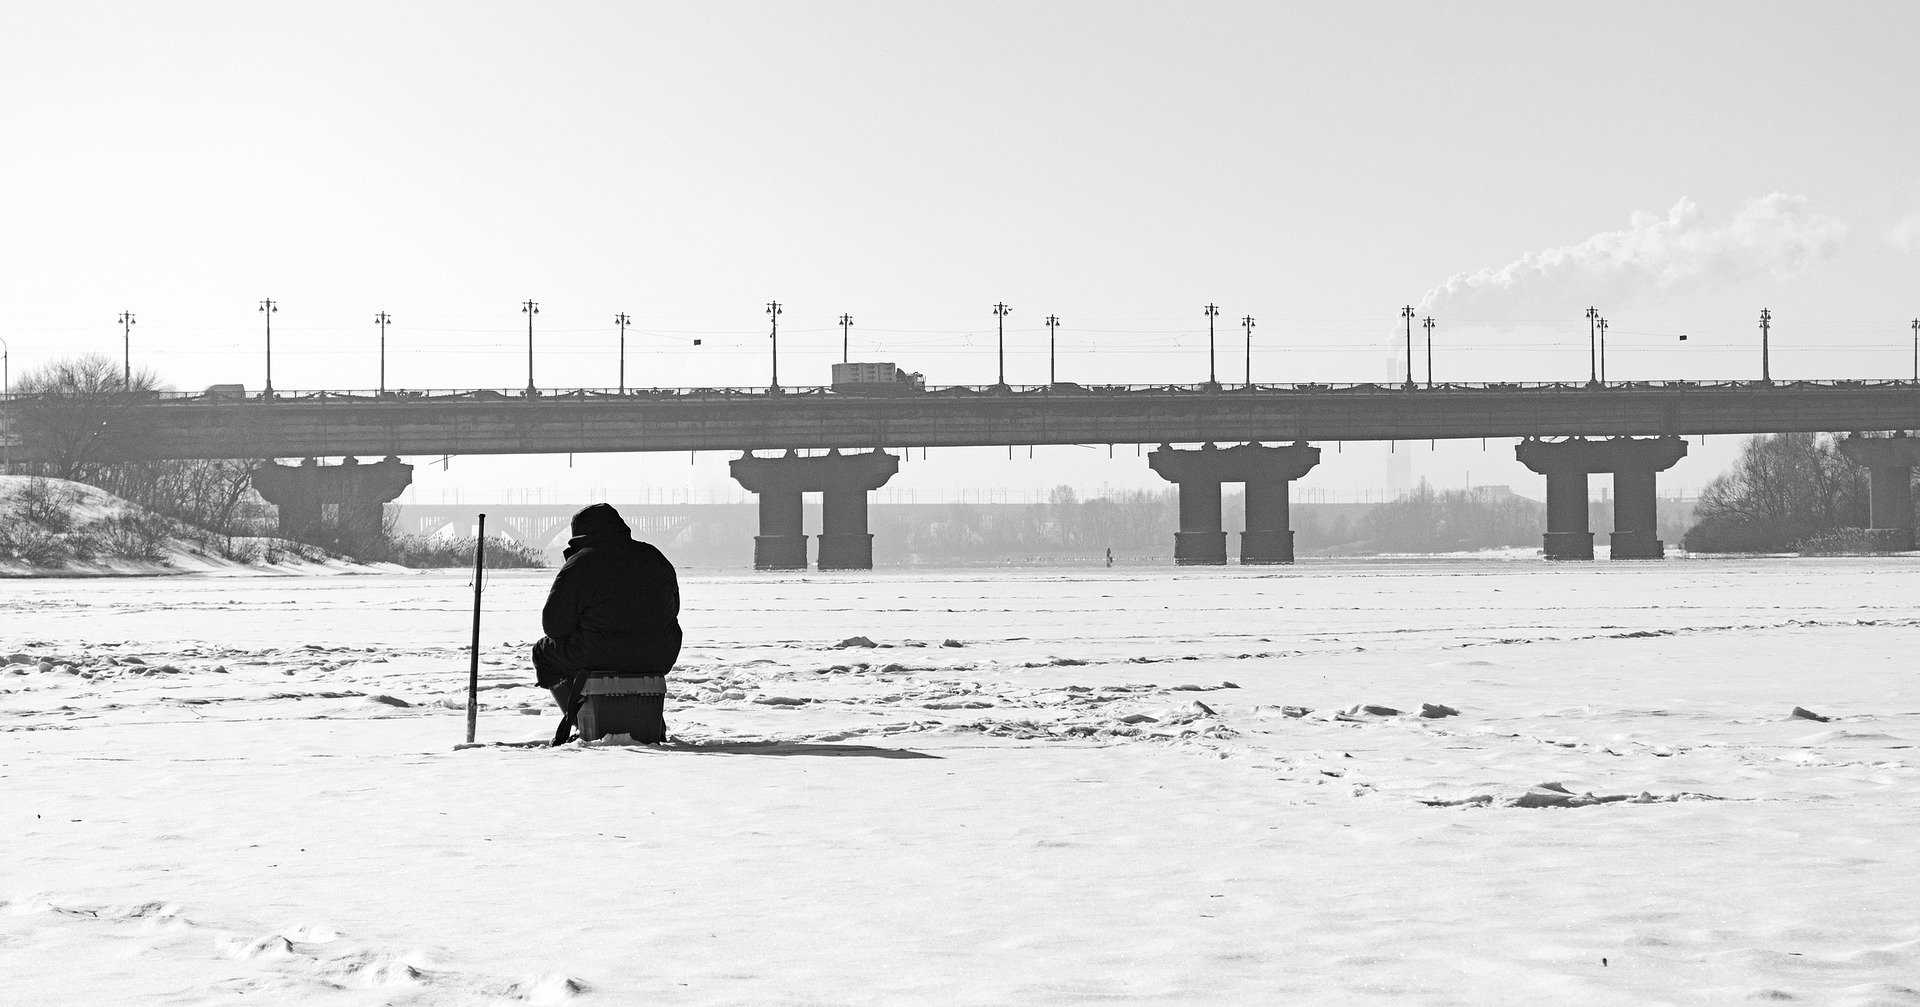 A man ice fishing in a frozen over river. | Source: Pixabay.